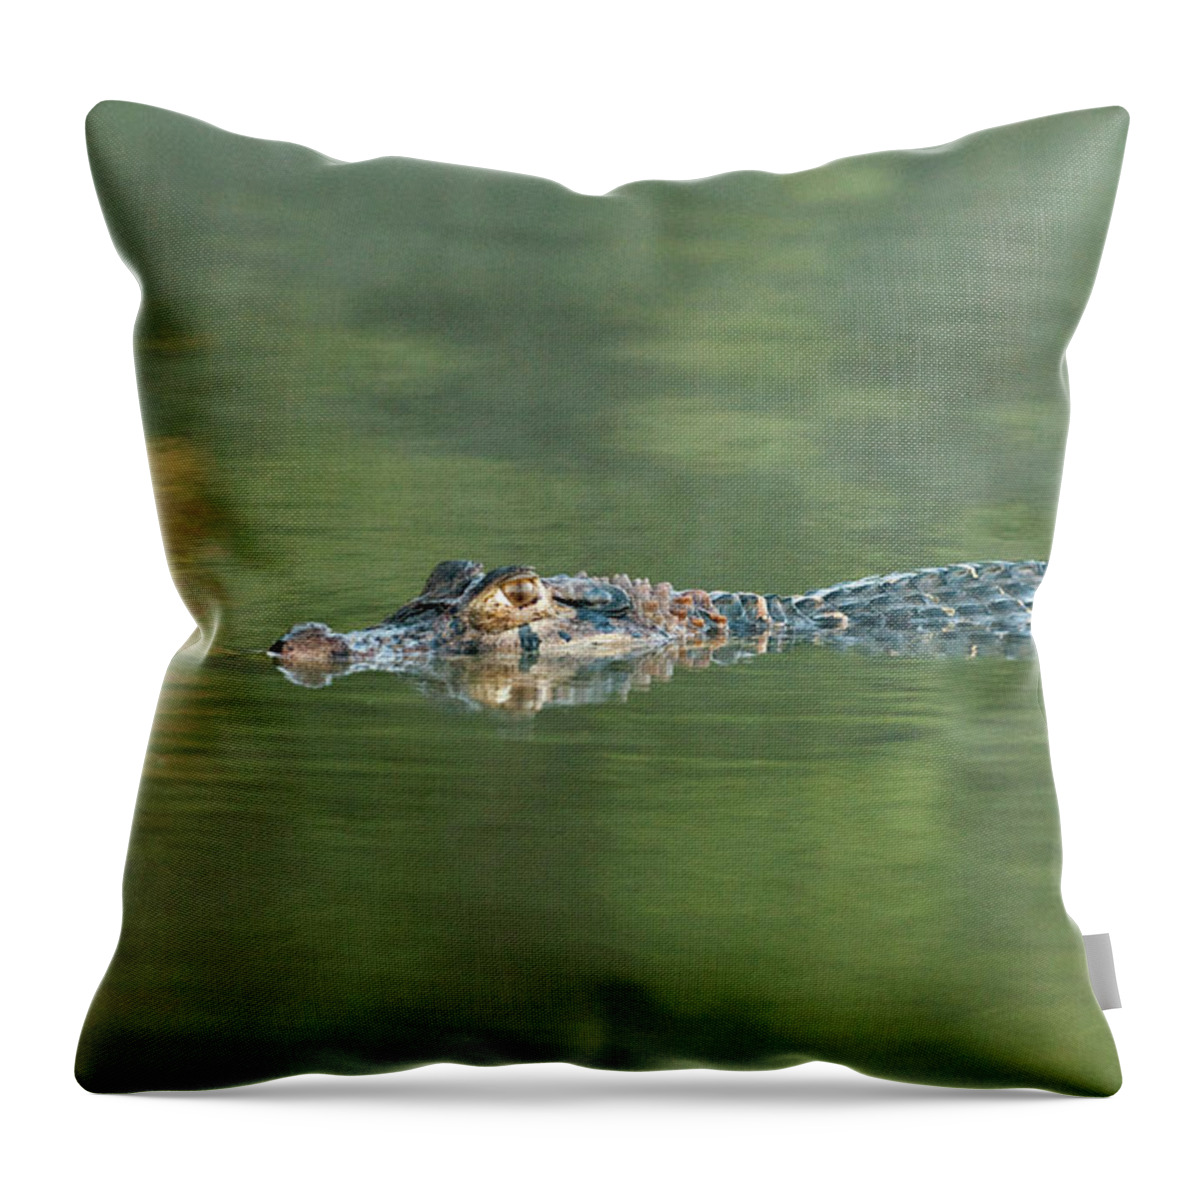 Adventure Throw Pillow featuring the photograph A Cayman Floats In Sandoval Lake by R. Tyler Gross